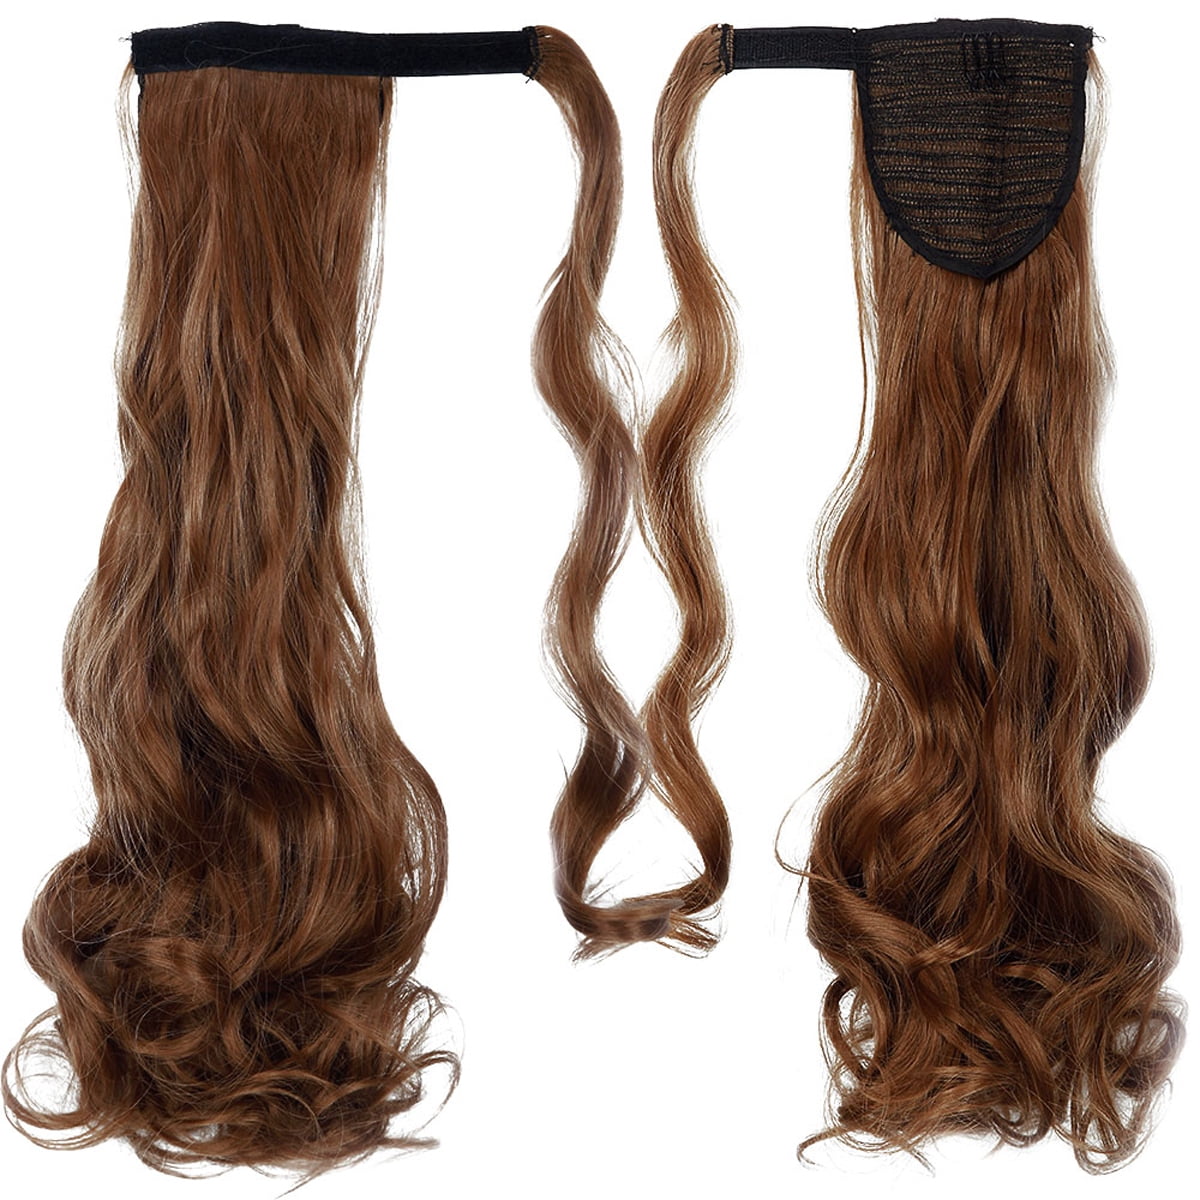 Long Curly Ponytail Hair Extensions